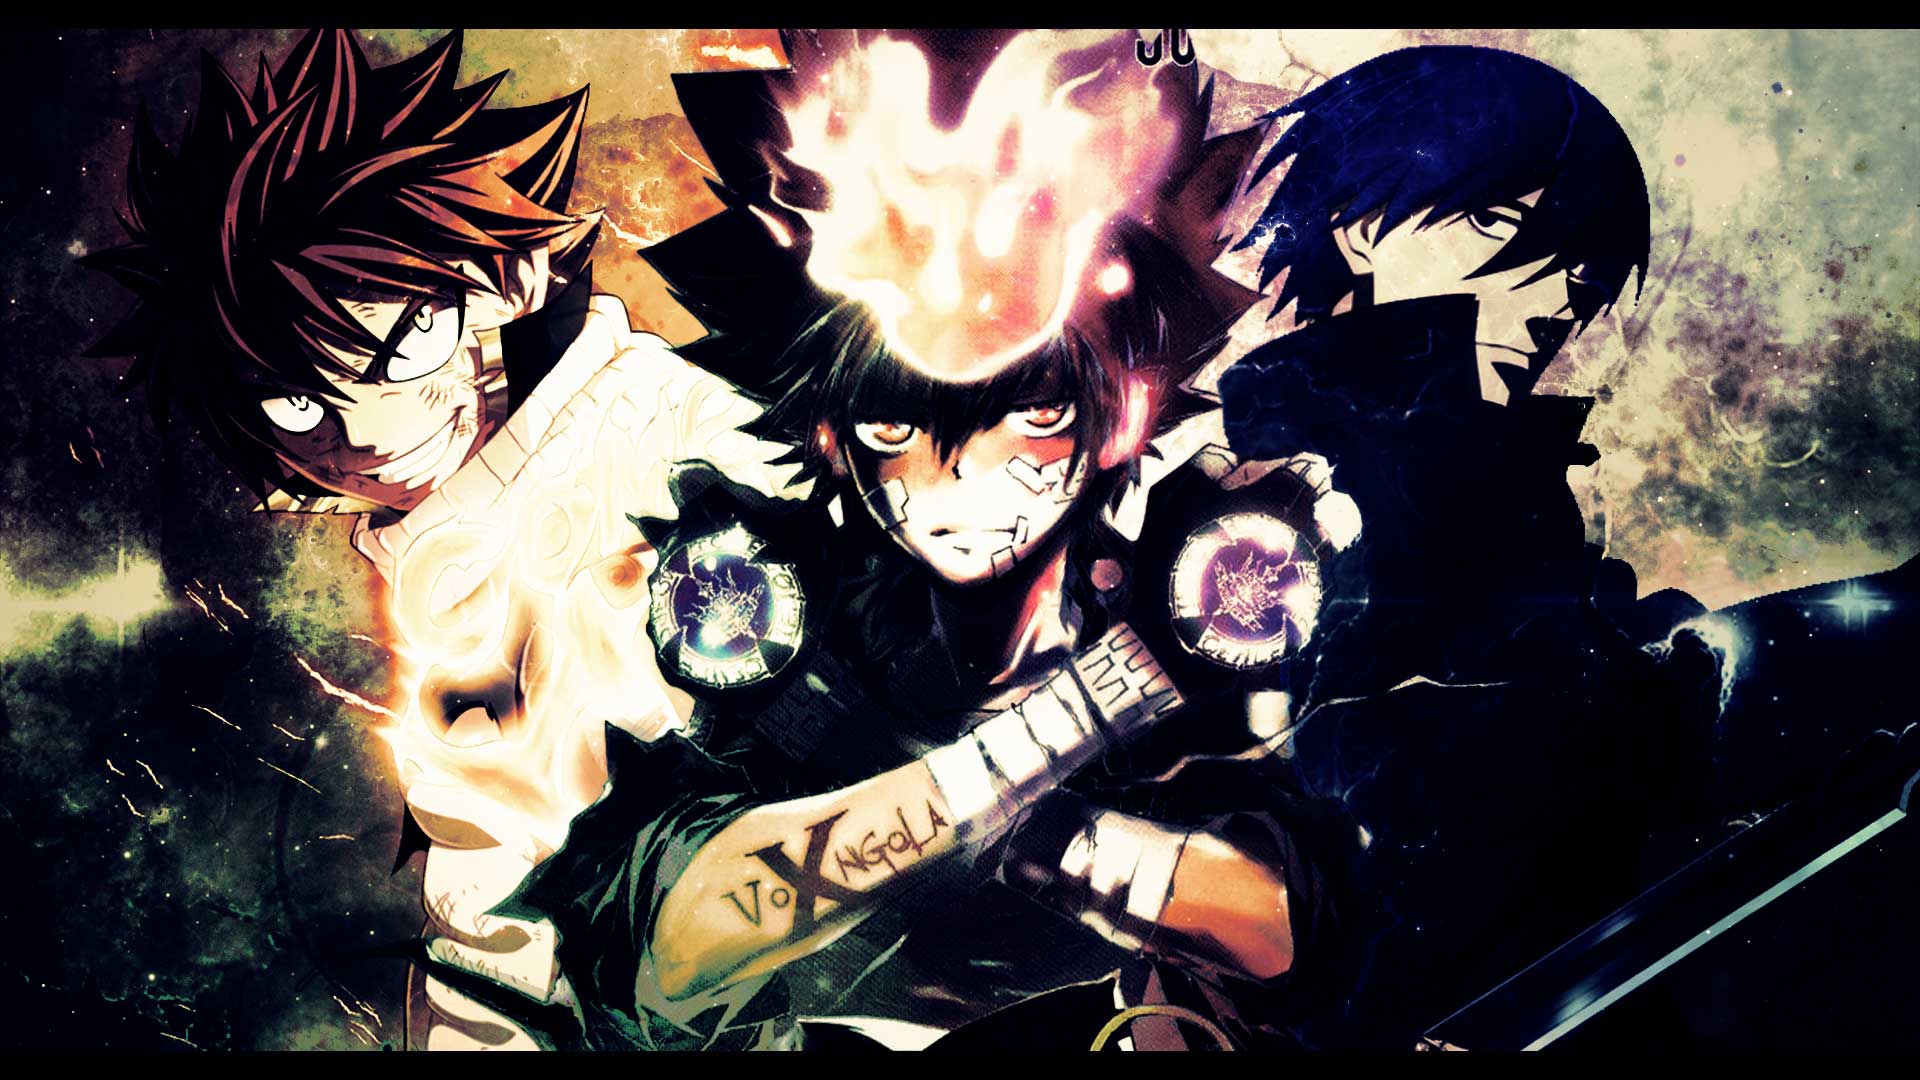 Download Fairy Tail HD Wallpaper for Free, BsnSCB.com